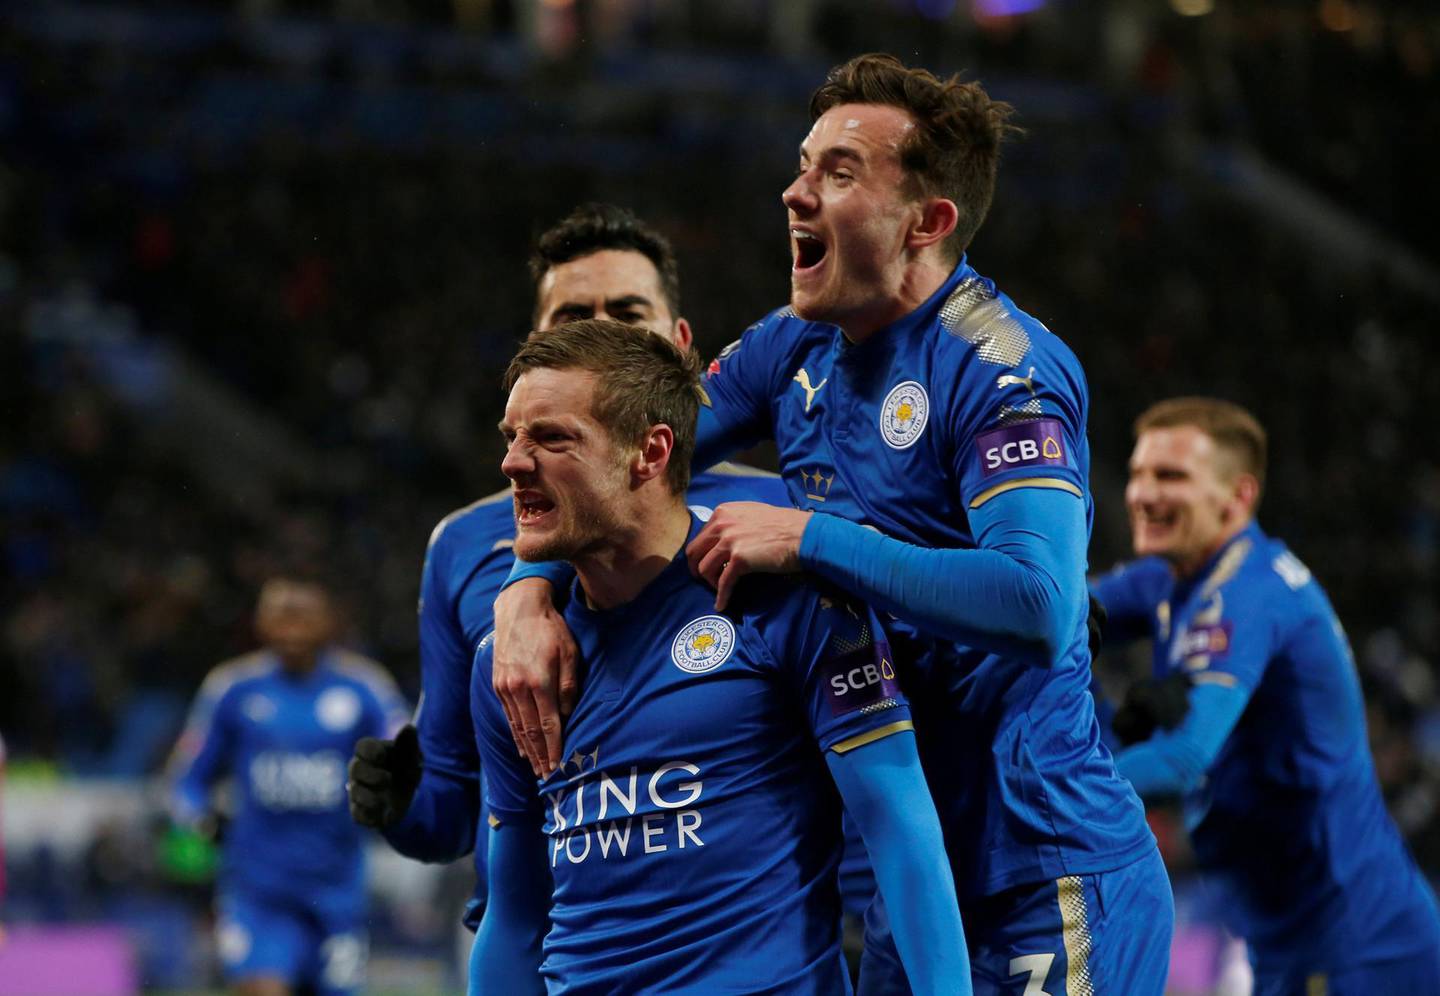 Soccer Football - FA Cup Quarter Final - Leicester City vs Chelsea - King Power Stadium, Leicester, Britain - March 18, 2018   Leicester City's Jamie Vardy celebrates scoring their first goal with team mates      REUTERS/Andrew Yates     TPX IMAGES OF THE DAY